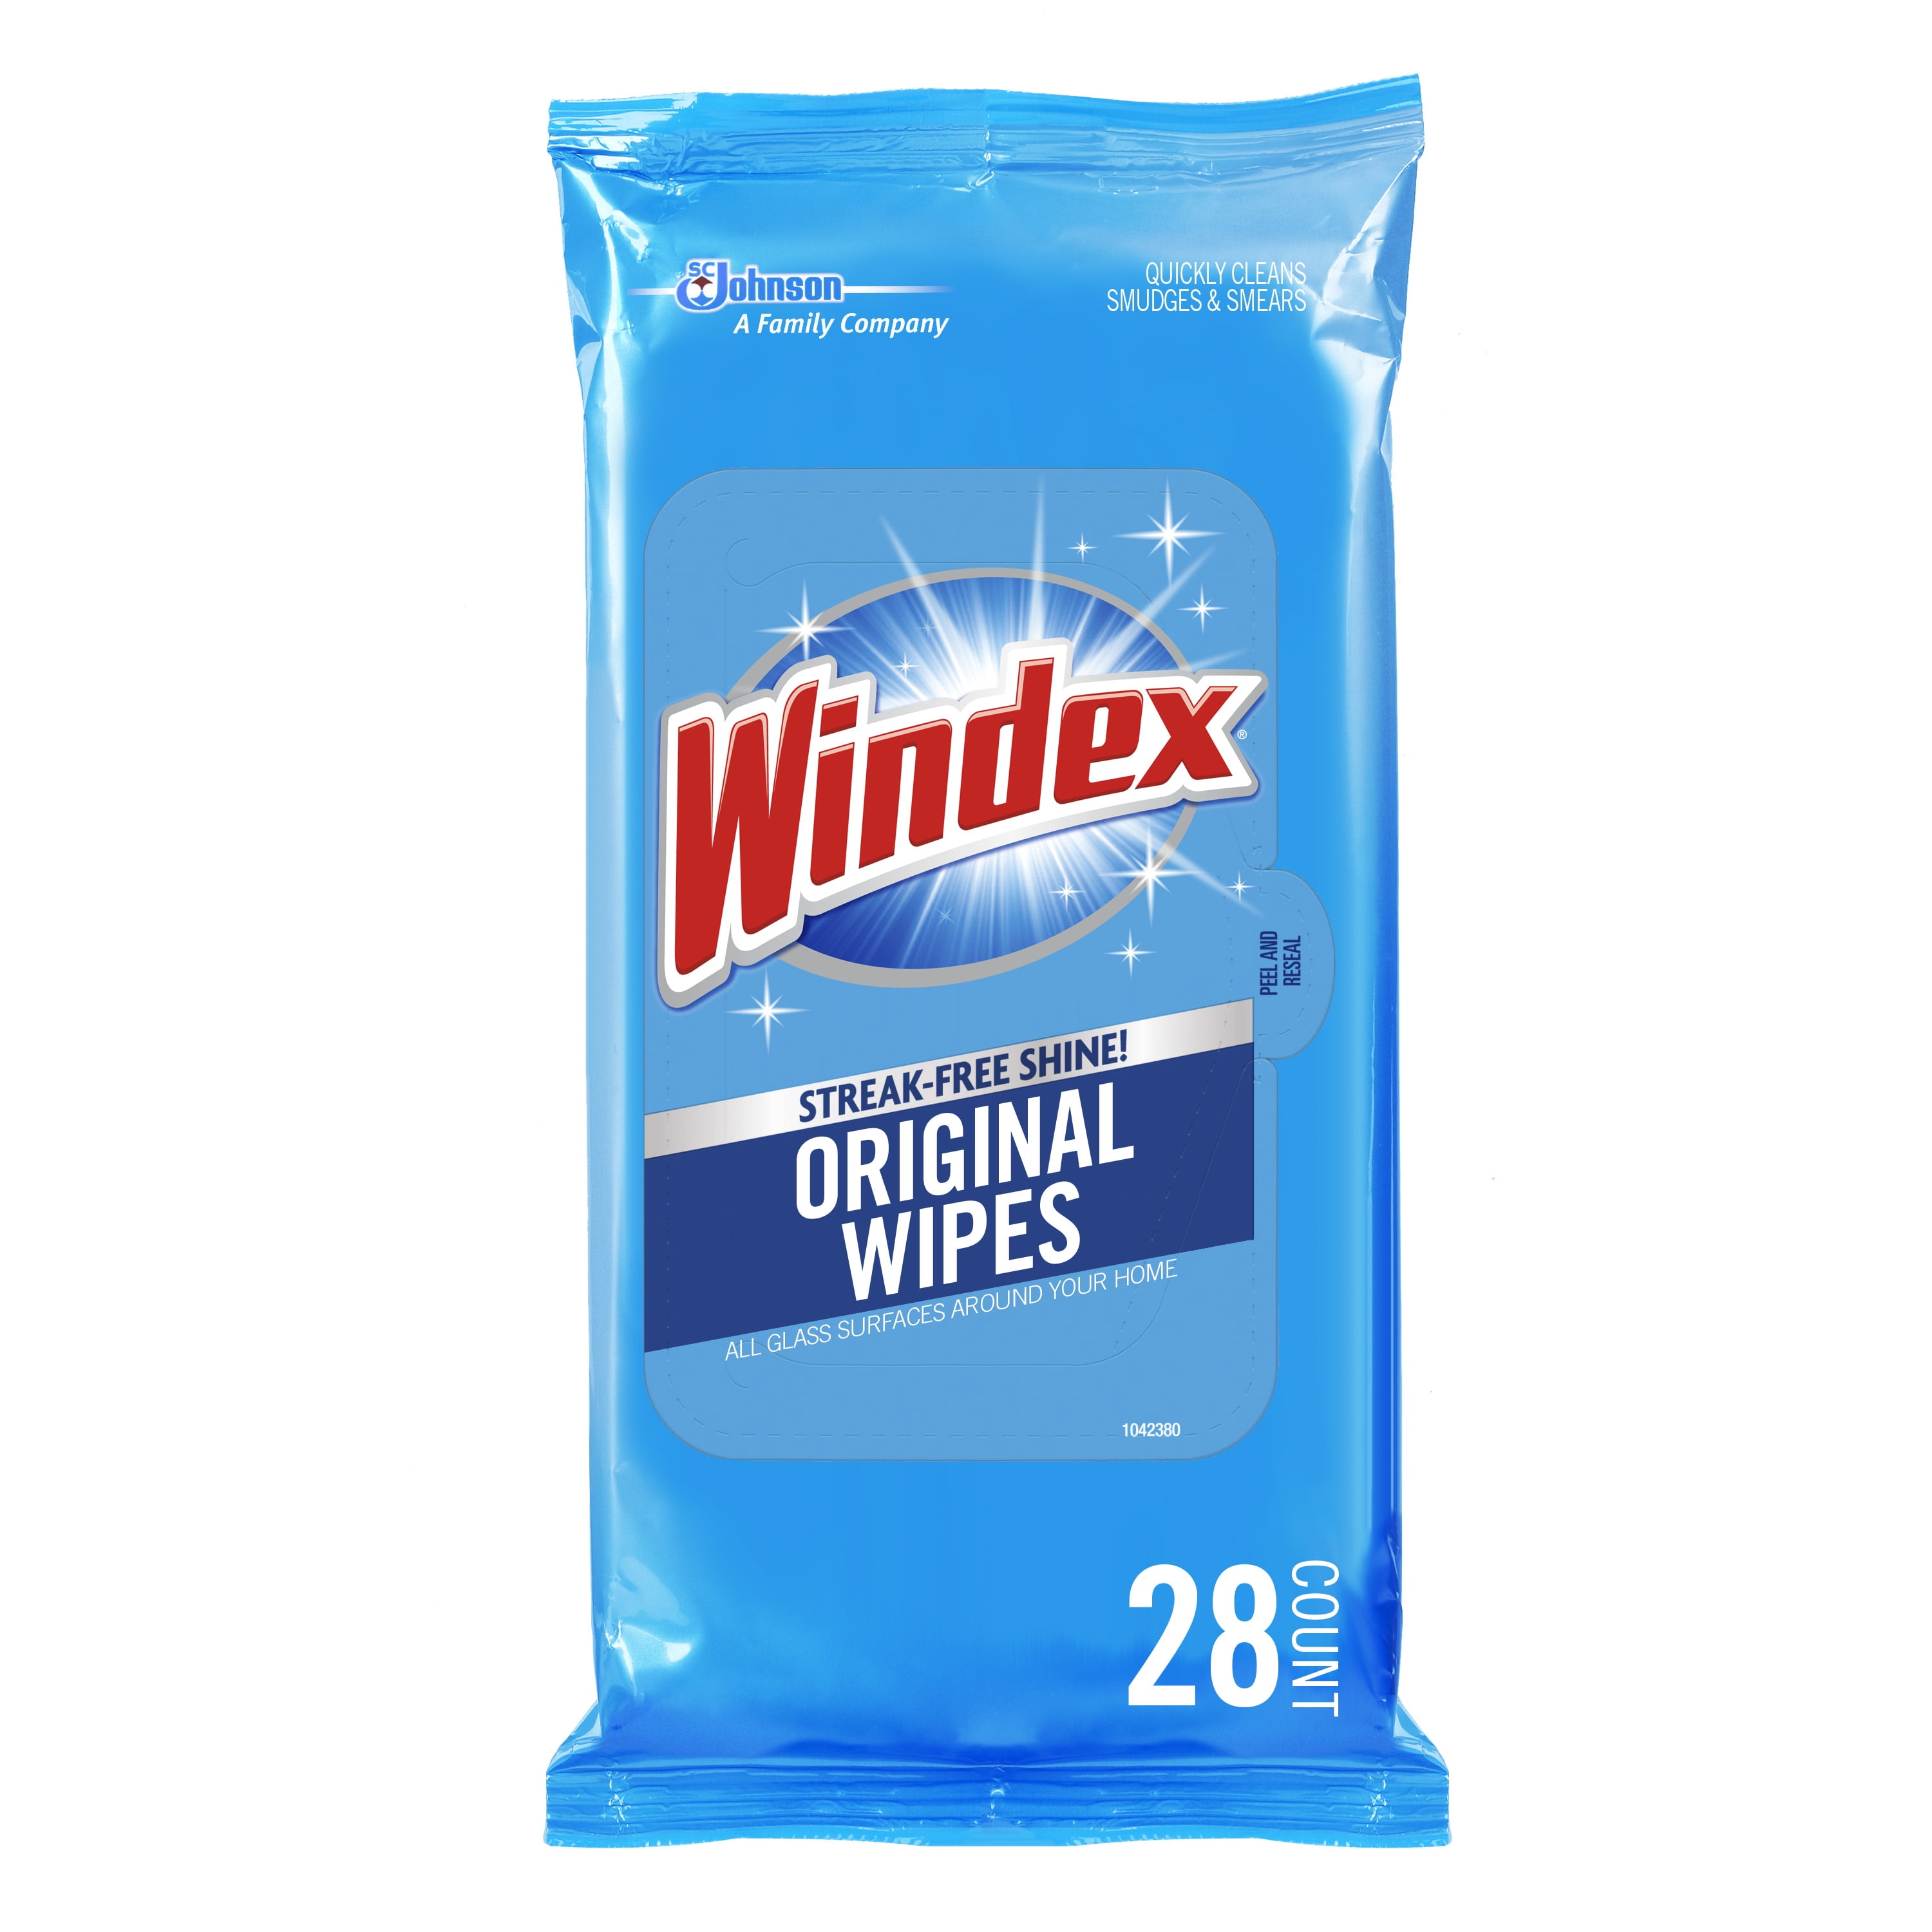 Windex Glass and Surface Pre-Moistened Wipes, Original, 38 Count